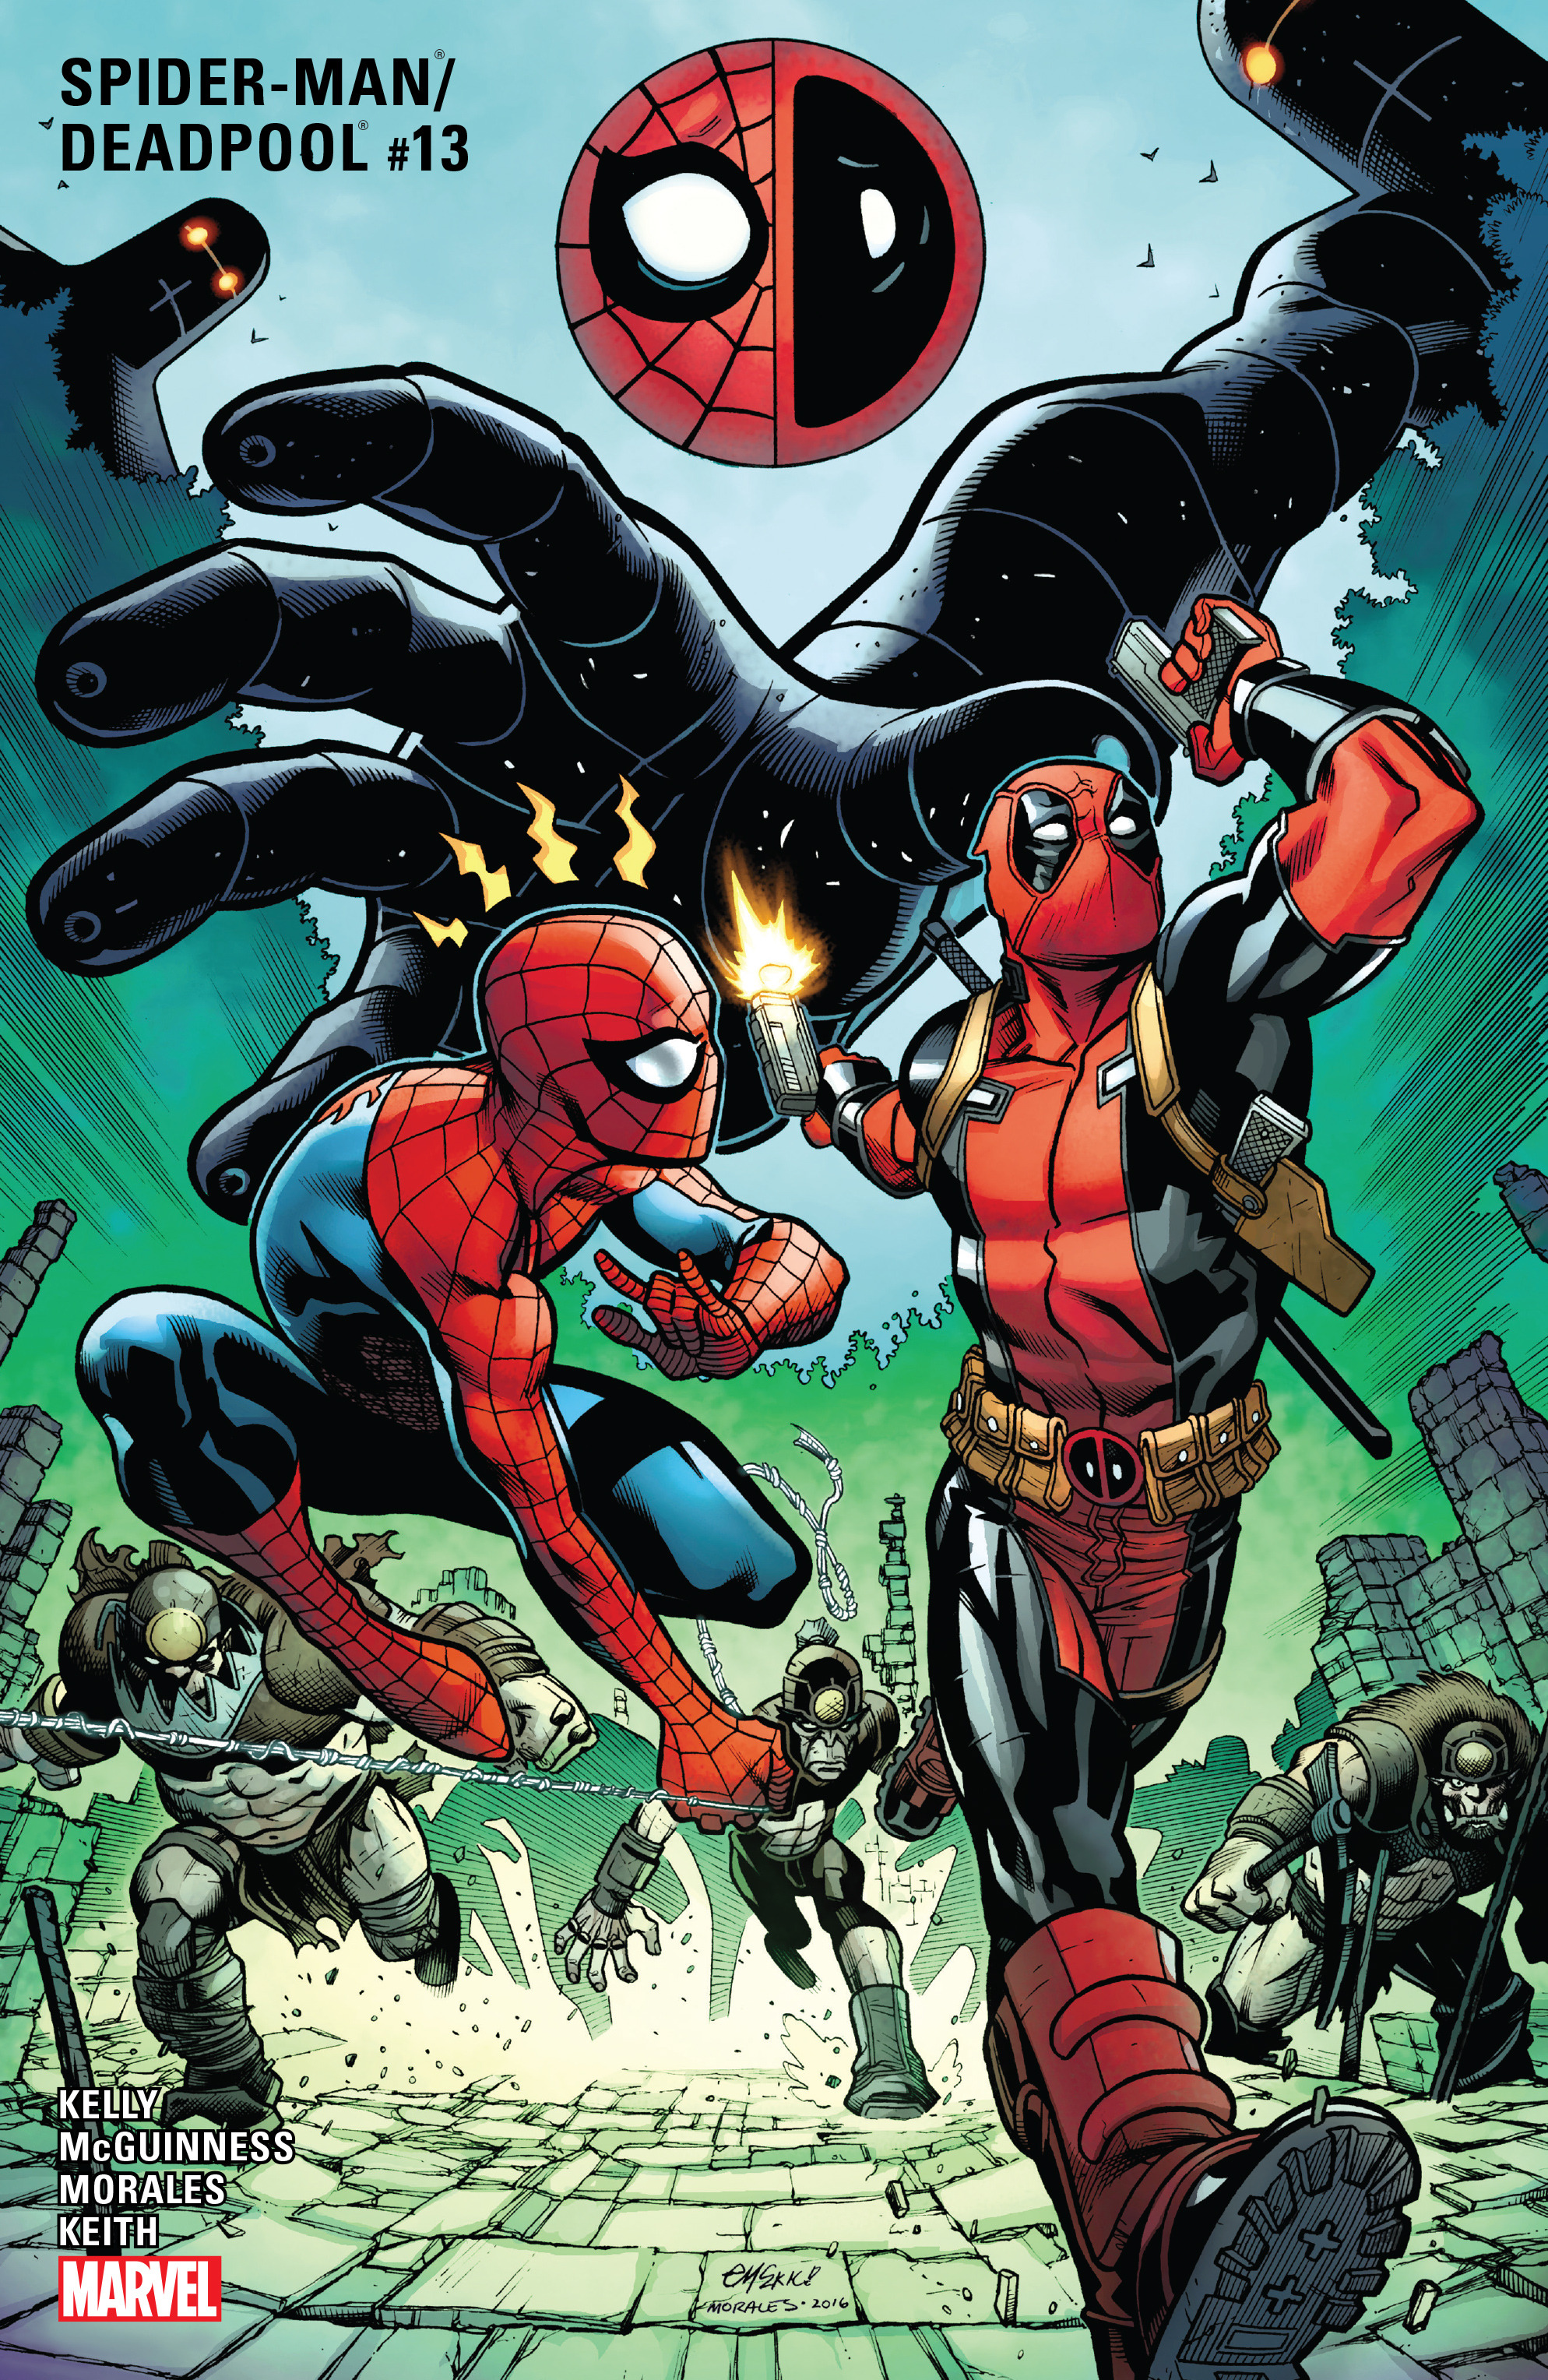 Spider Man Deadpool Issue 13 | Read Spider Man Deadpool Issue 13 comic  online in high quality. Read Full Comic online for free - Read comics online  in high quality .| READ COMIC ONLINE